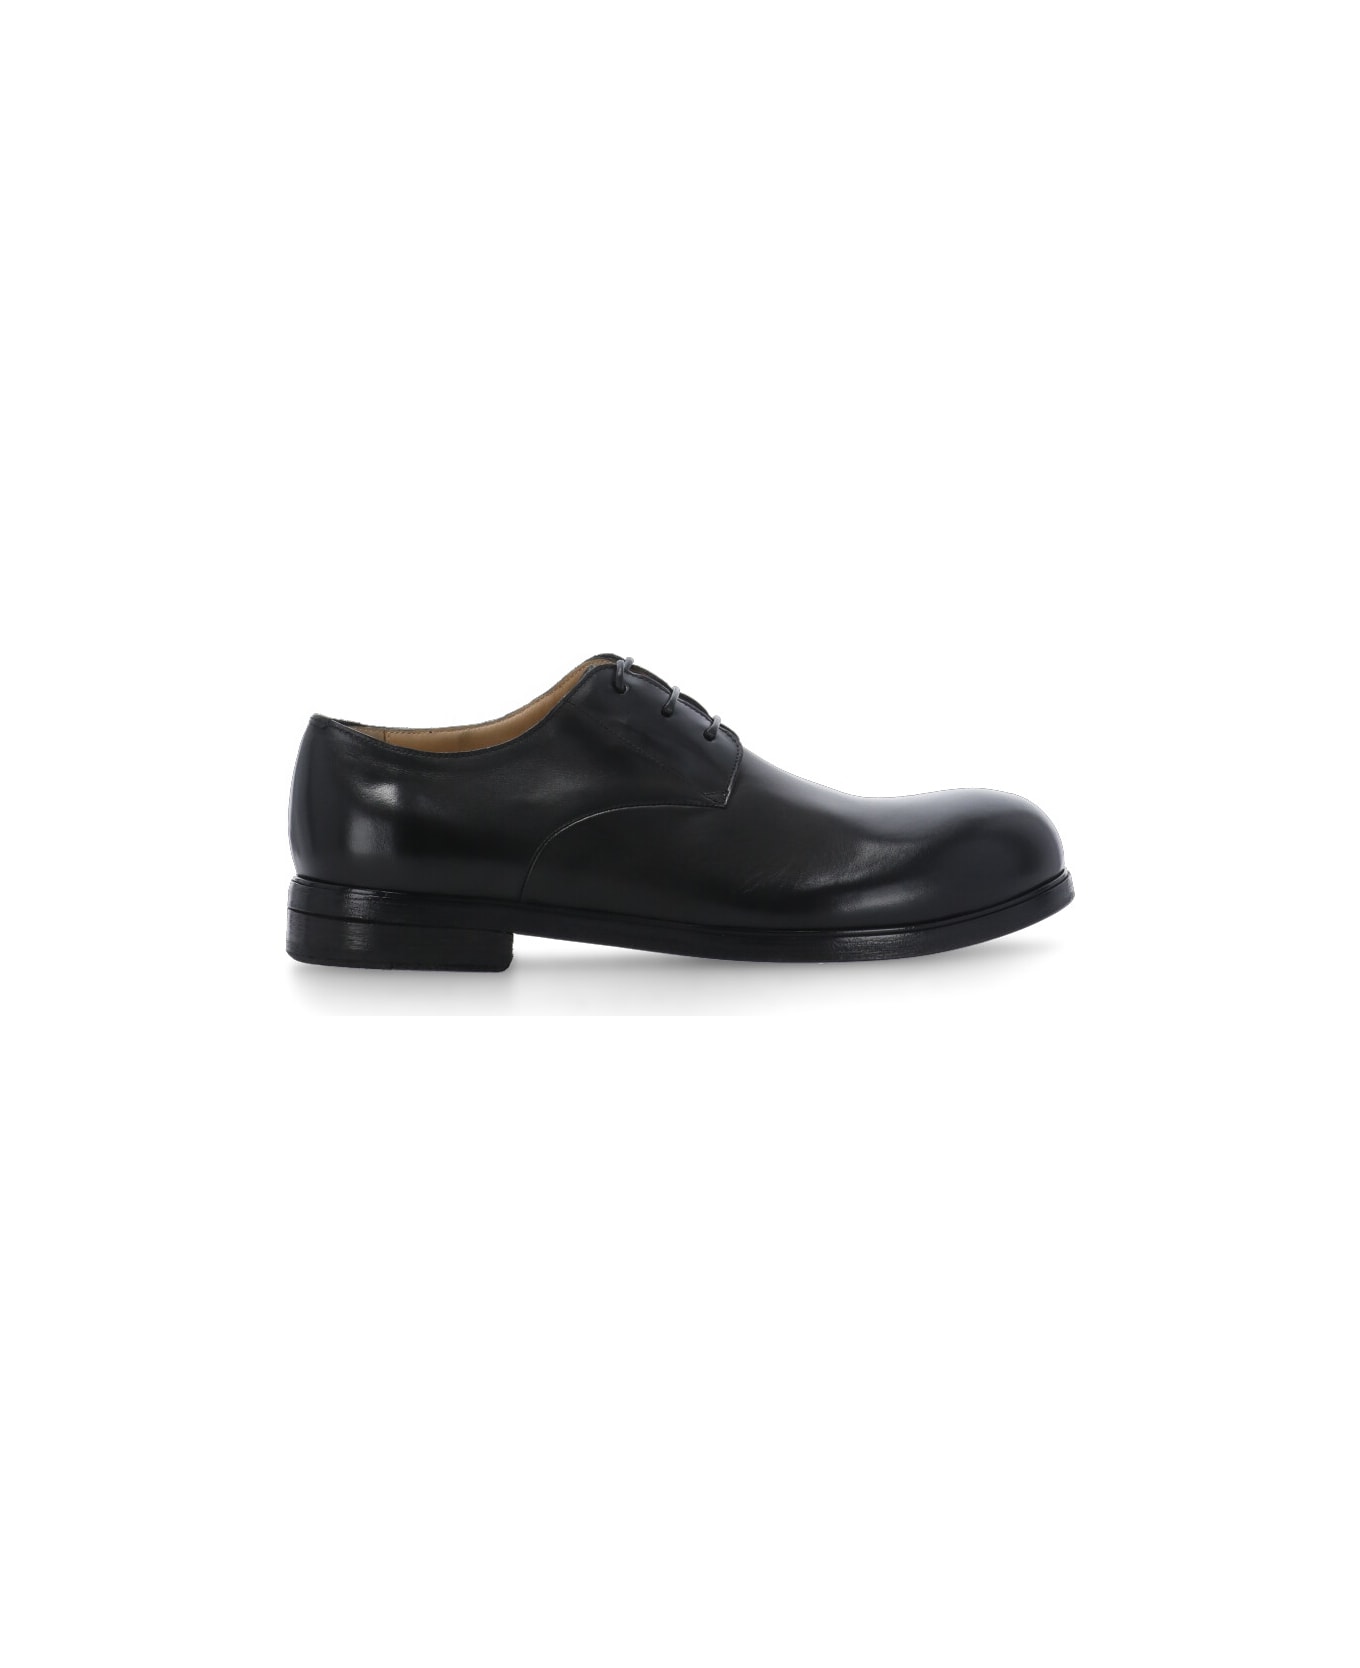 Marsell Zucca Media Lace Up Shoes - Black